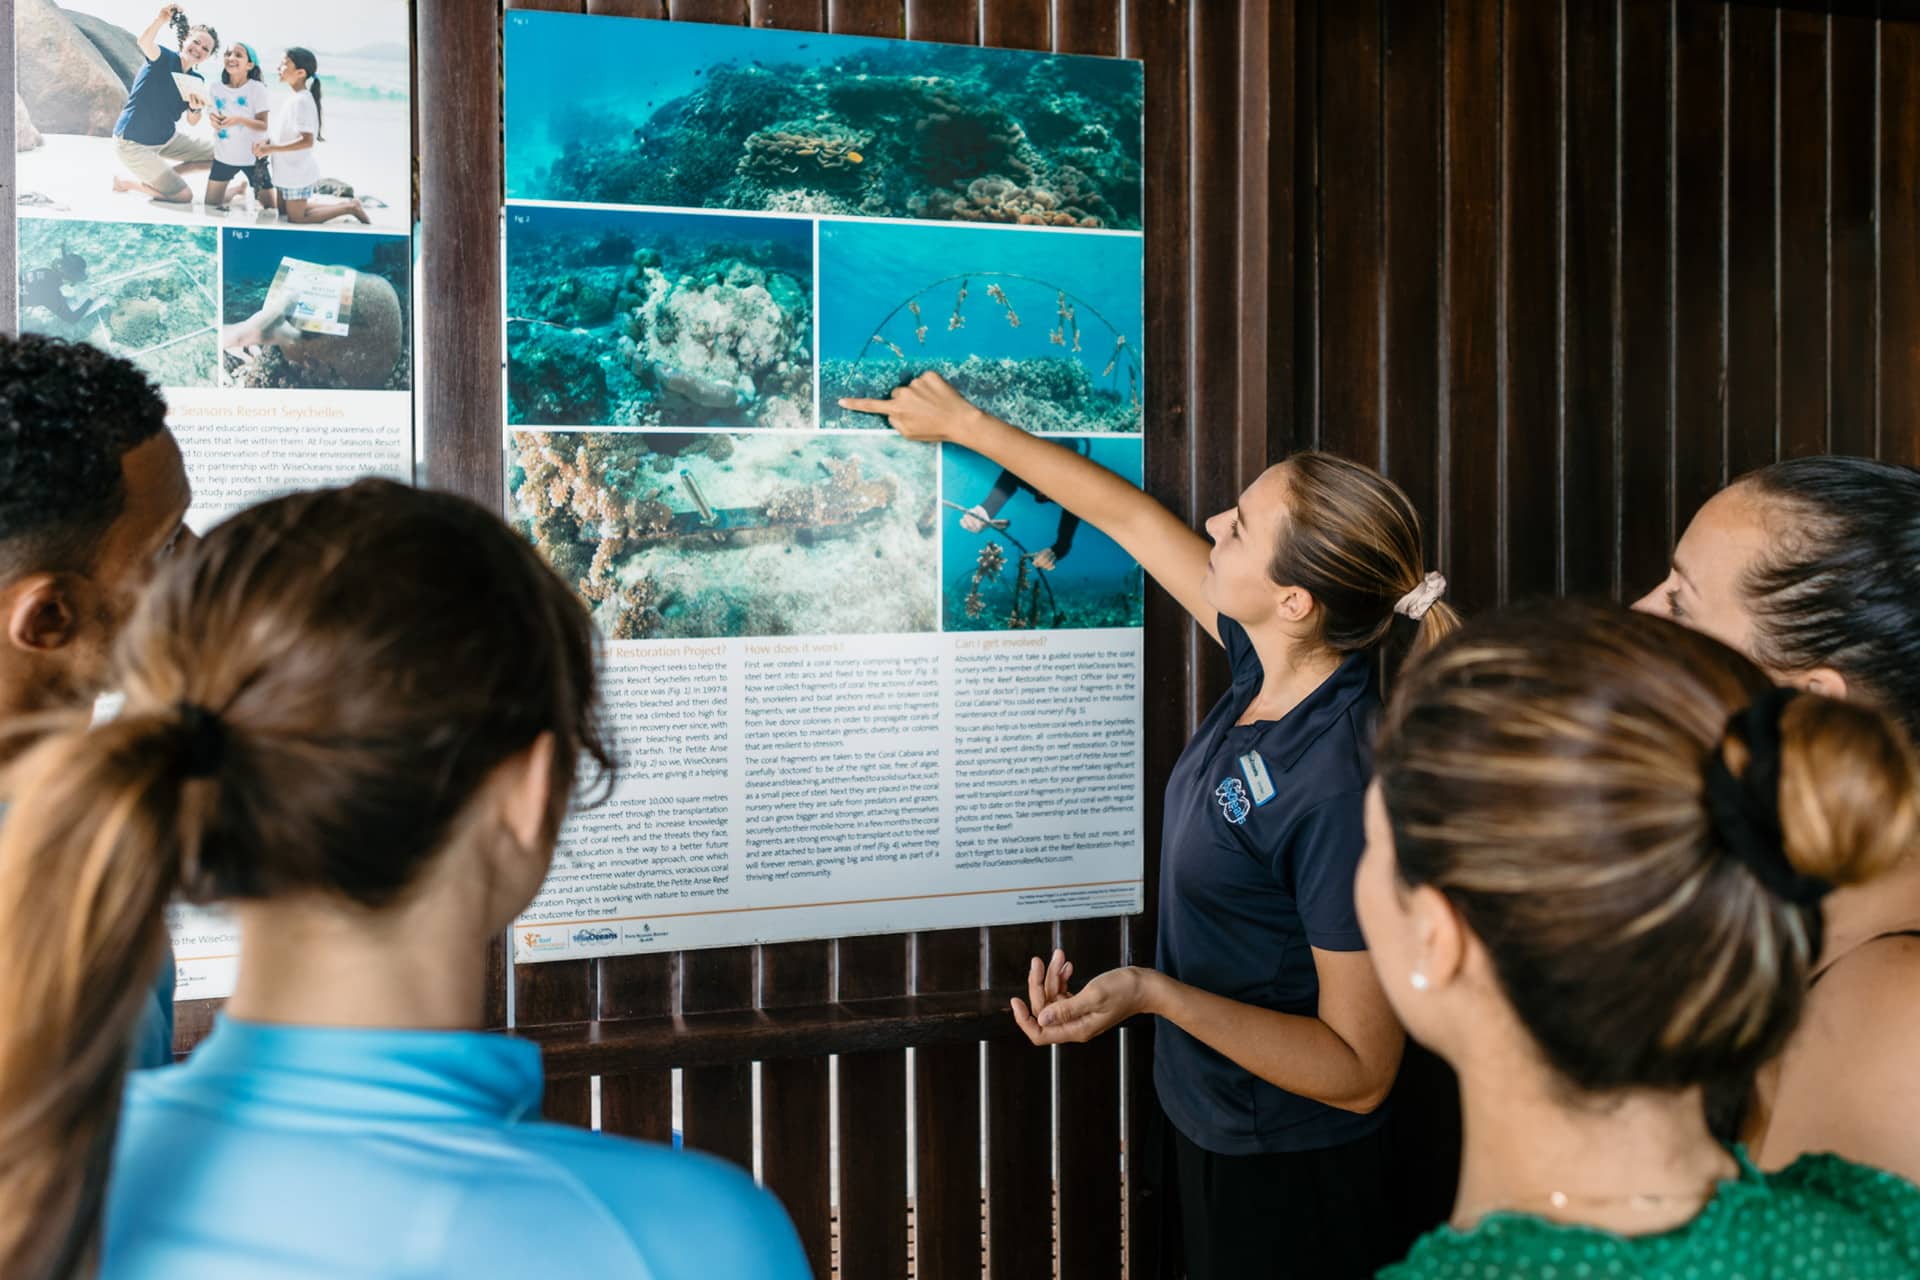 A marine educator from WiseOceans at the Discovery Centre, Four Seasons Seychelles, talking about the ocean